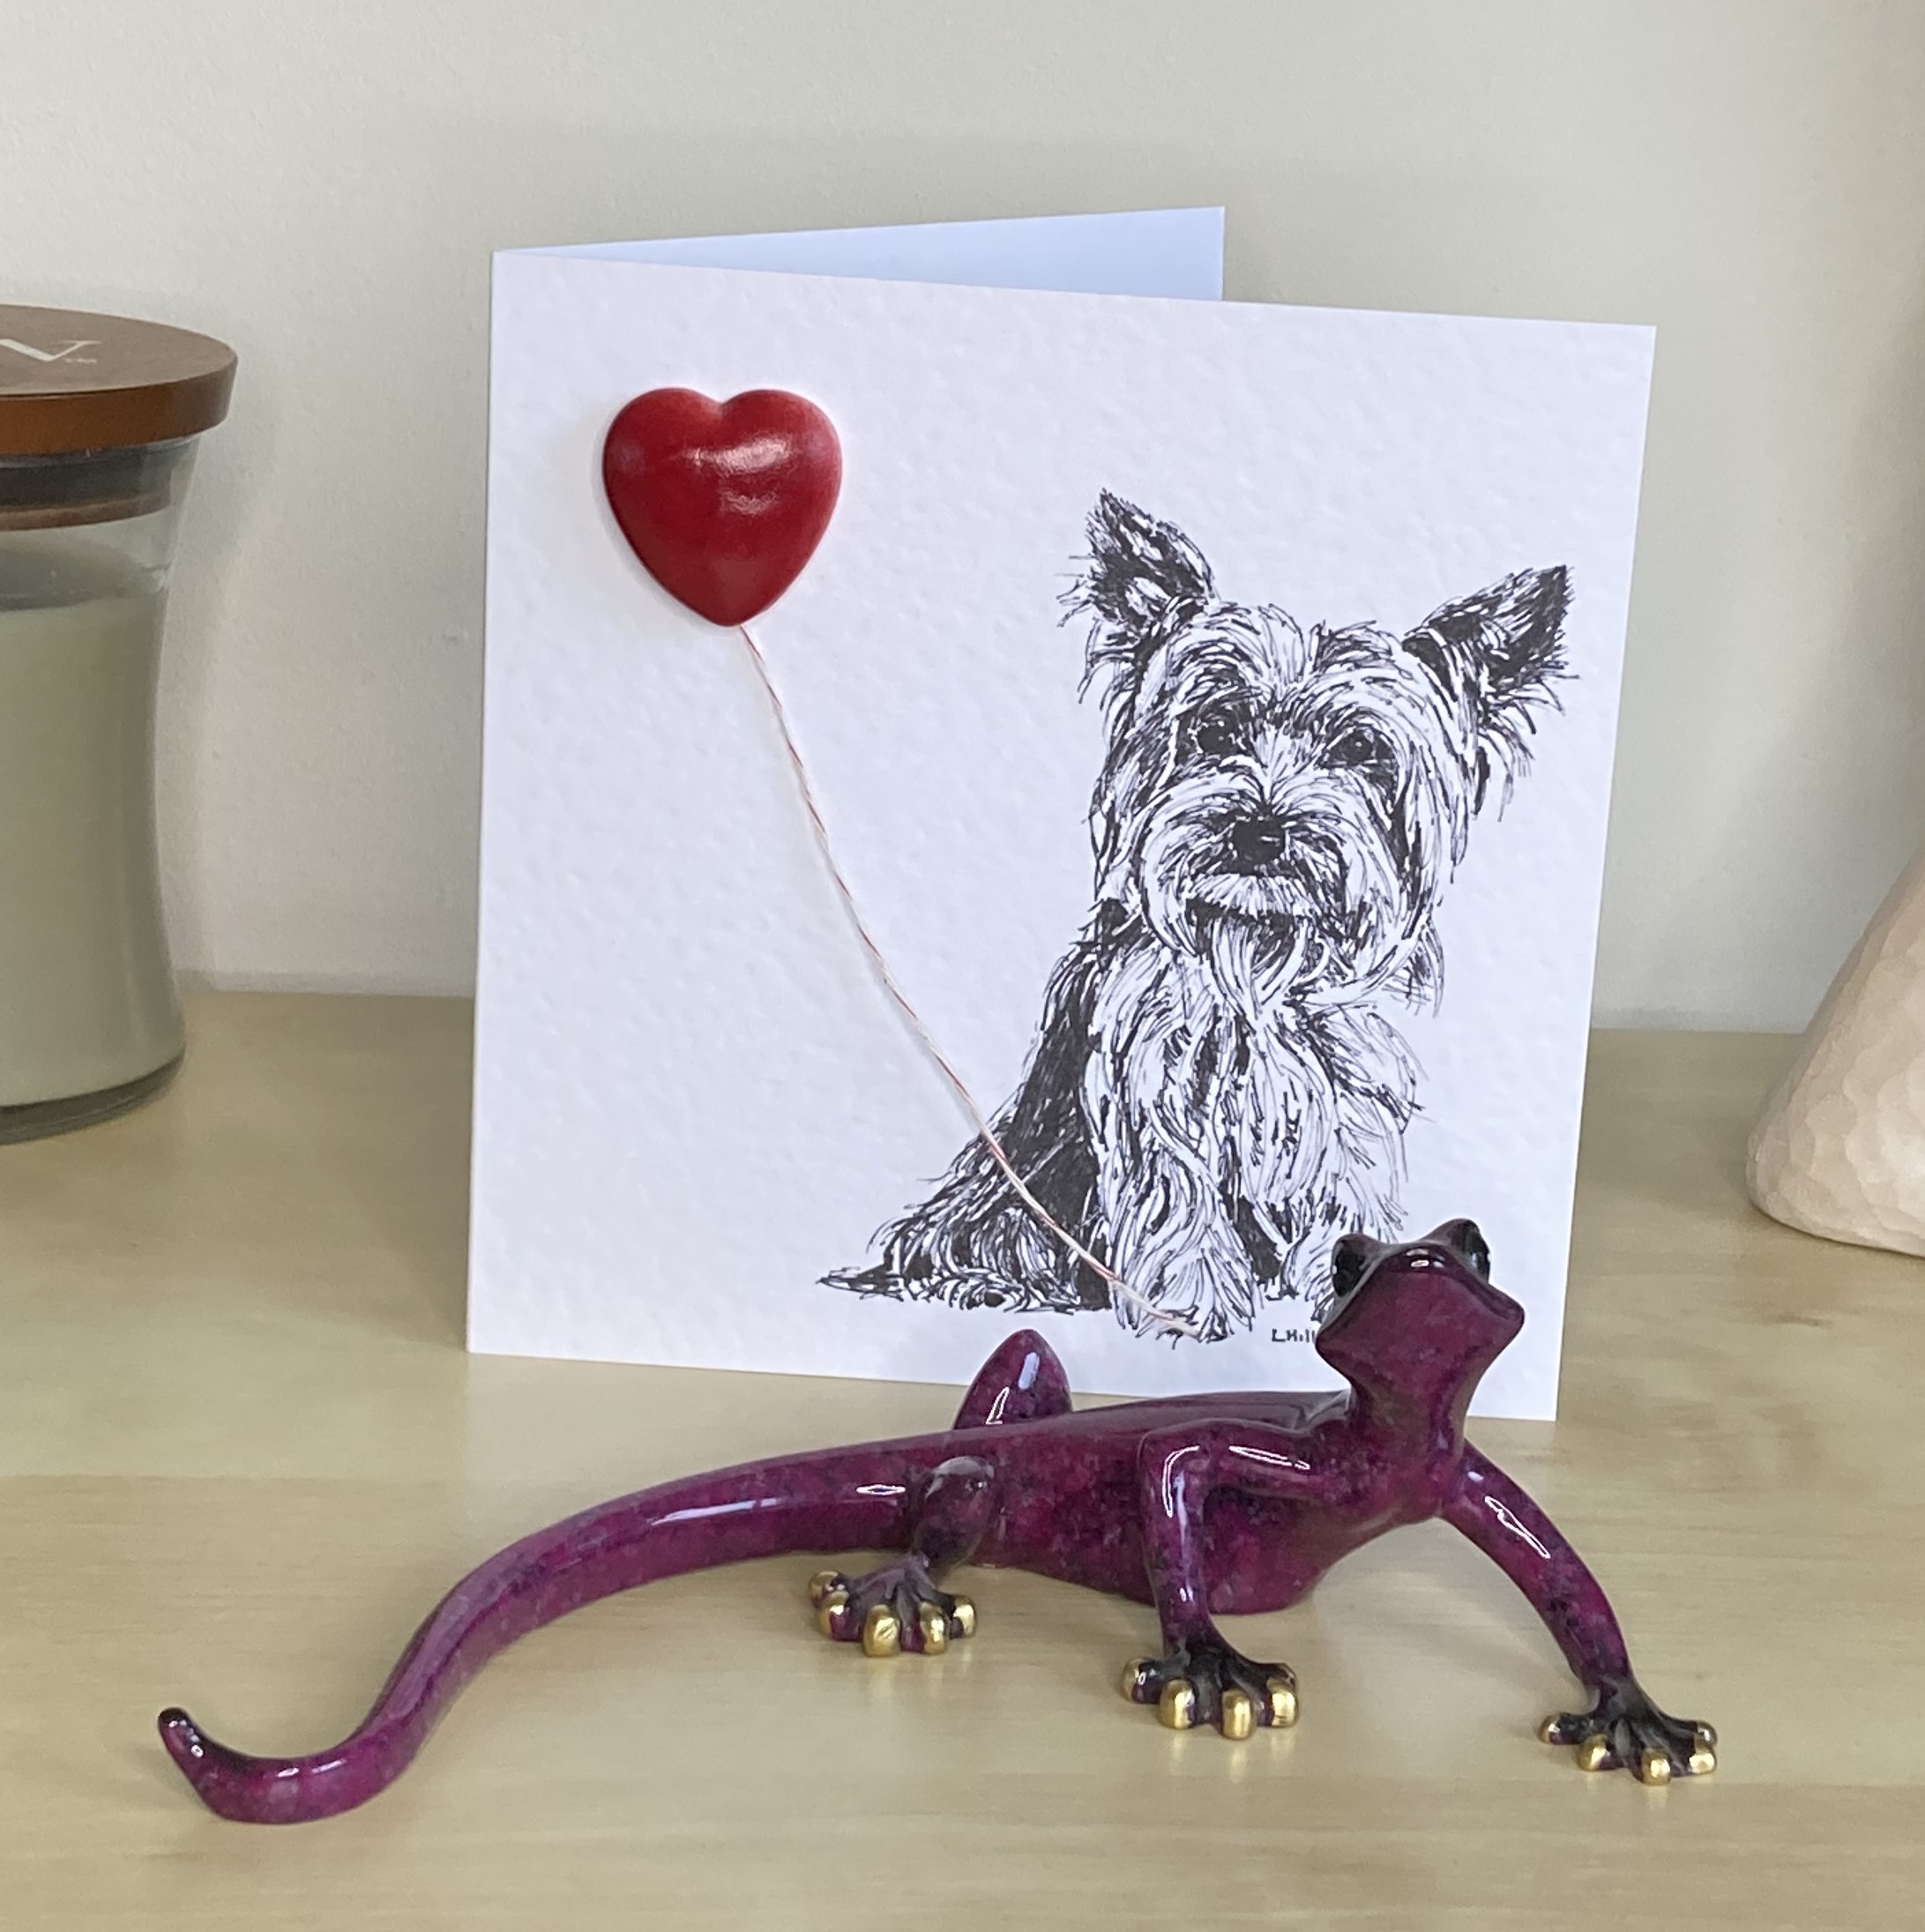 Yorkshire Terrier 15cm greetings card with 3D red heart balloon